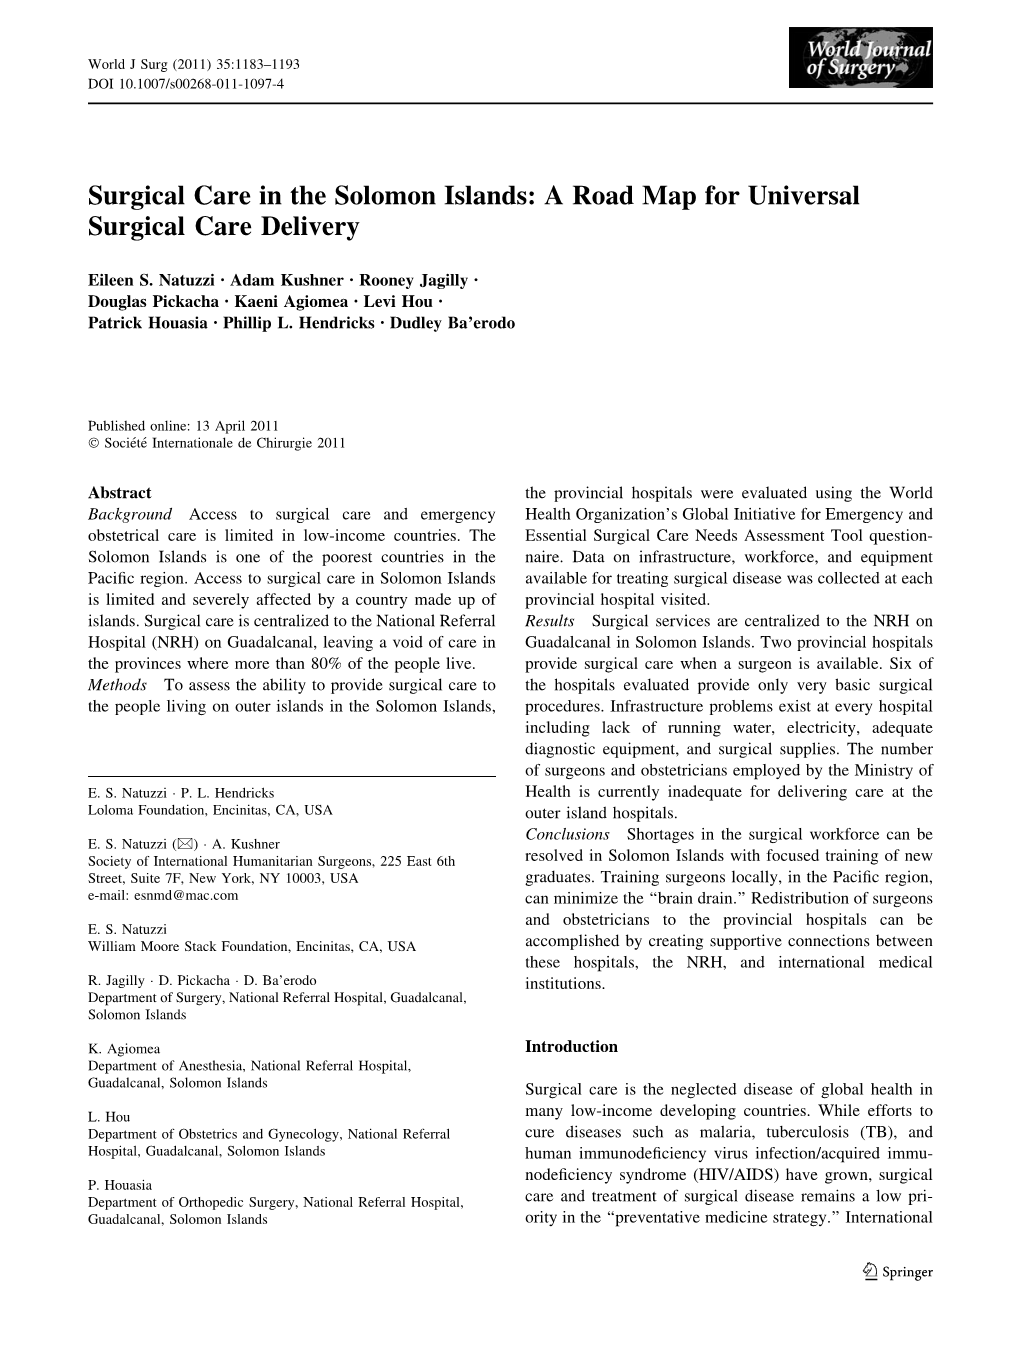 Surgical Care in the Solomon Islands: a Road Map for Universal Surgical Care Delivery